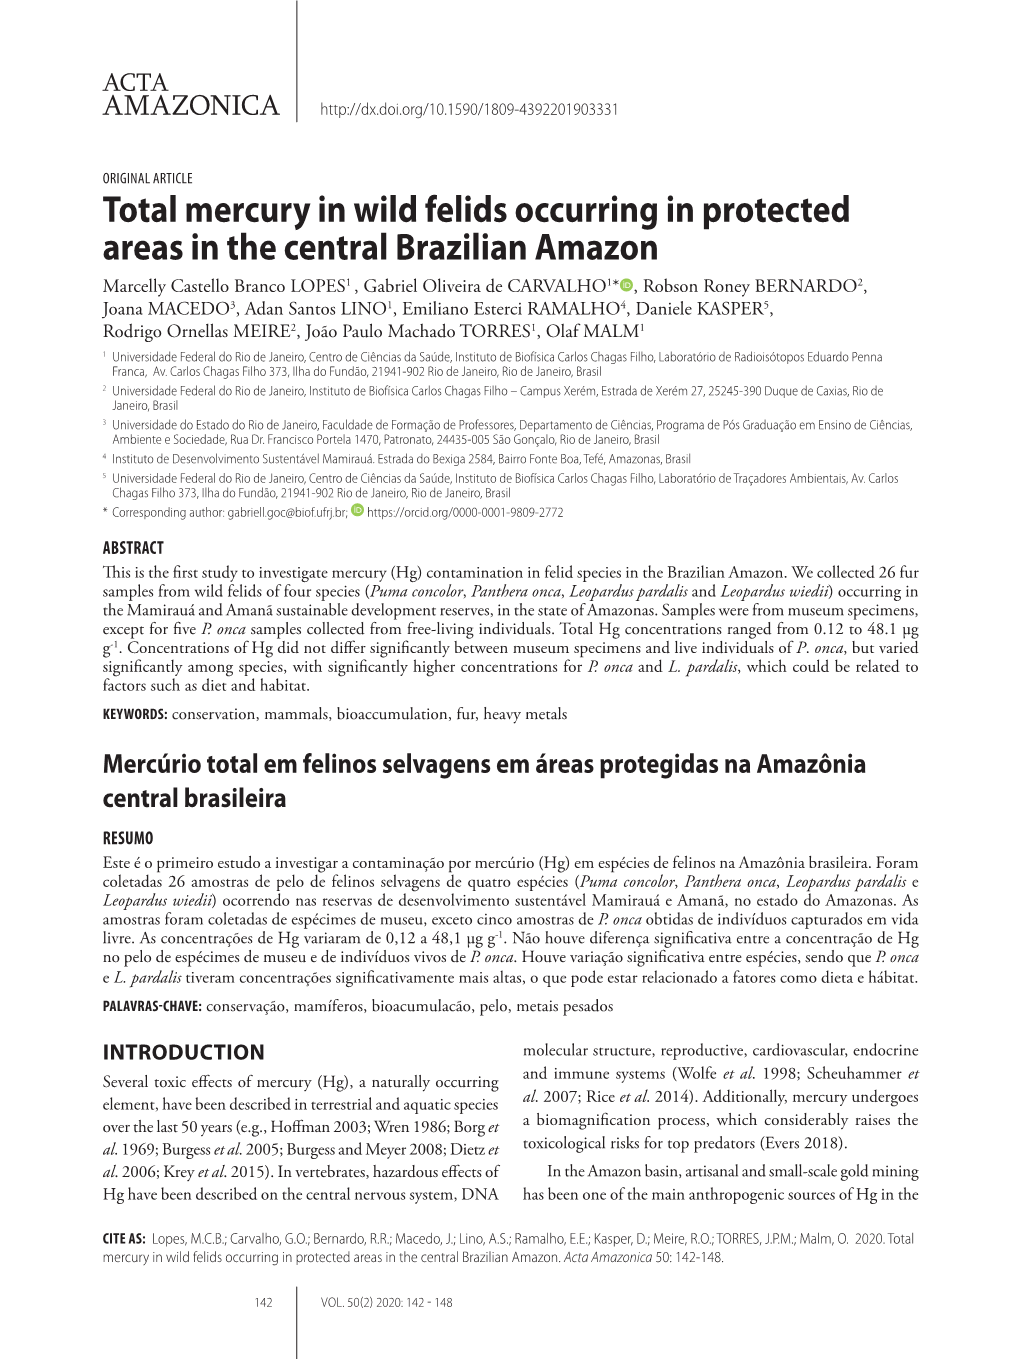 Total Mercury in Wild Felids Occurring in Protected Areas in the Central